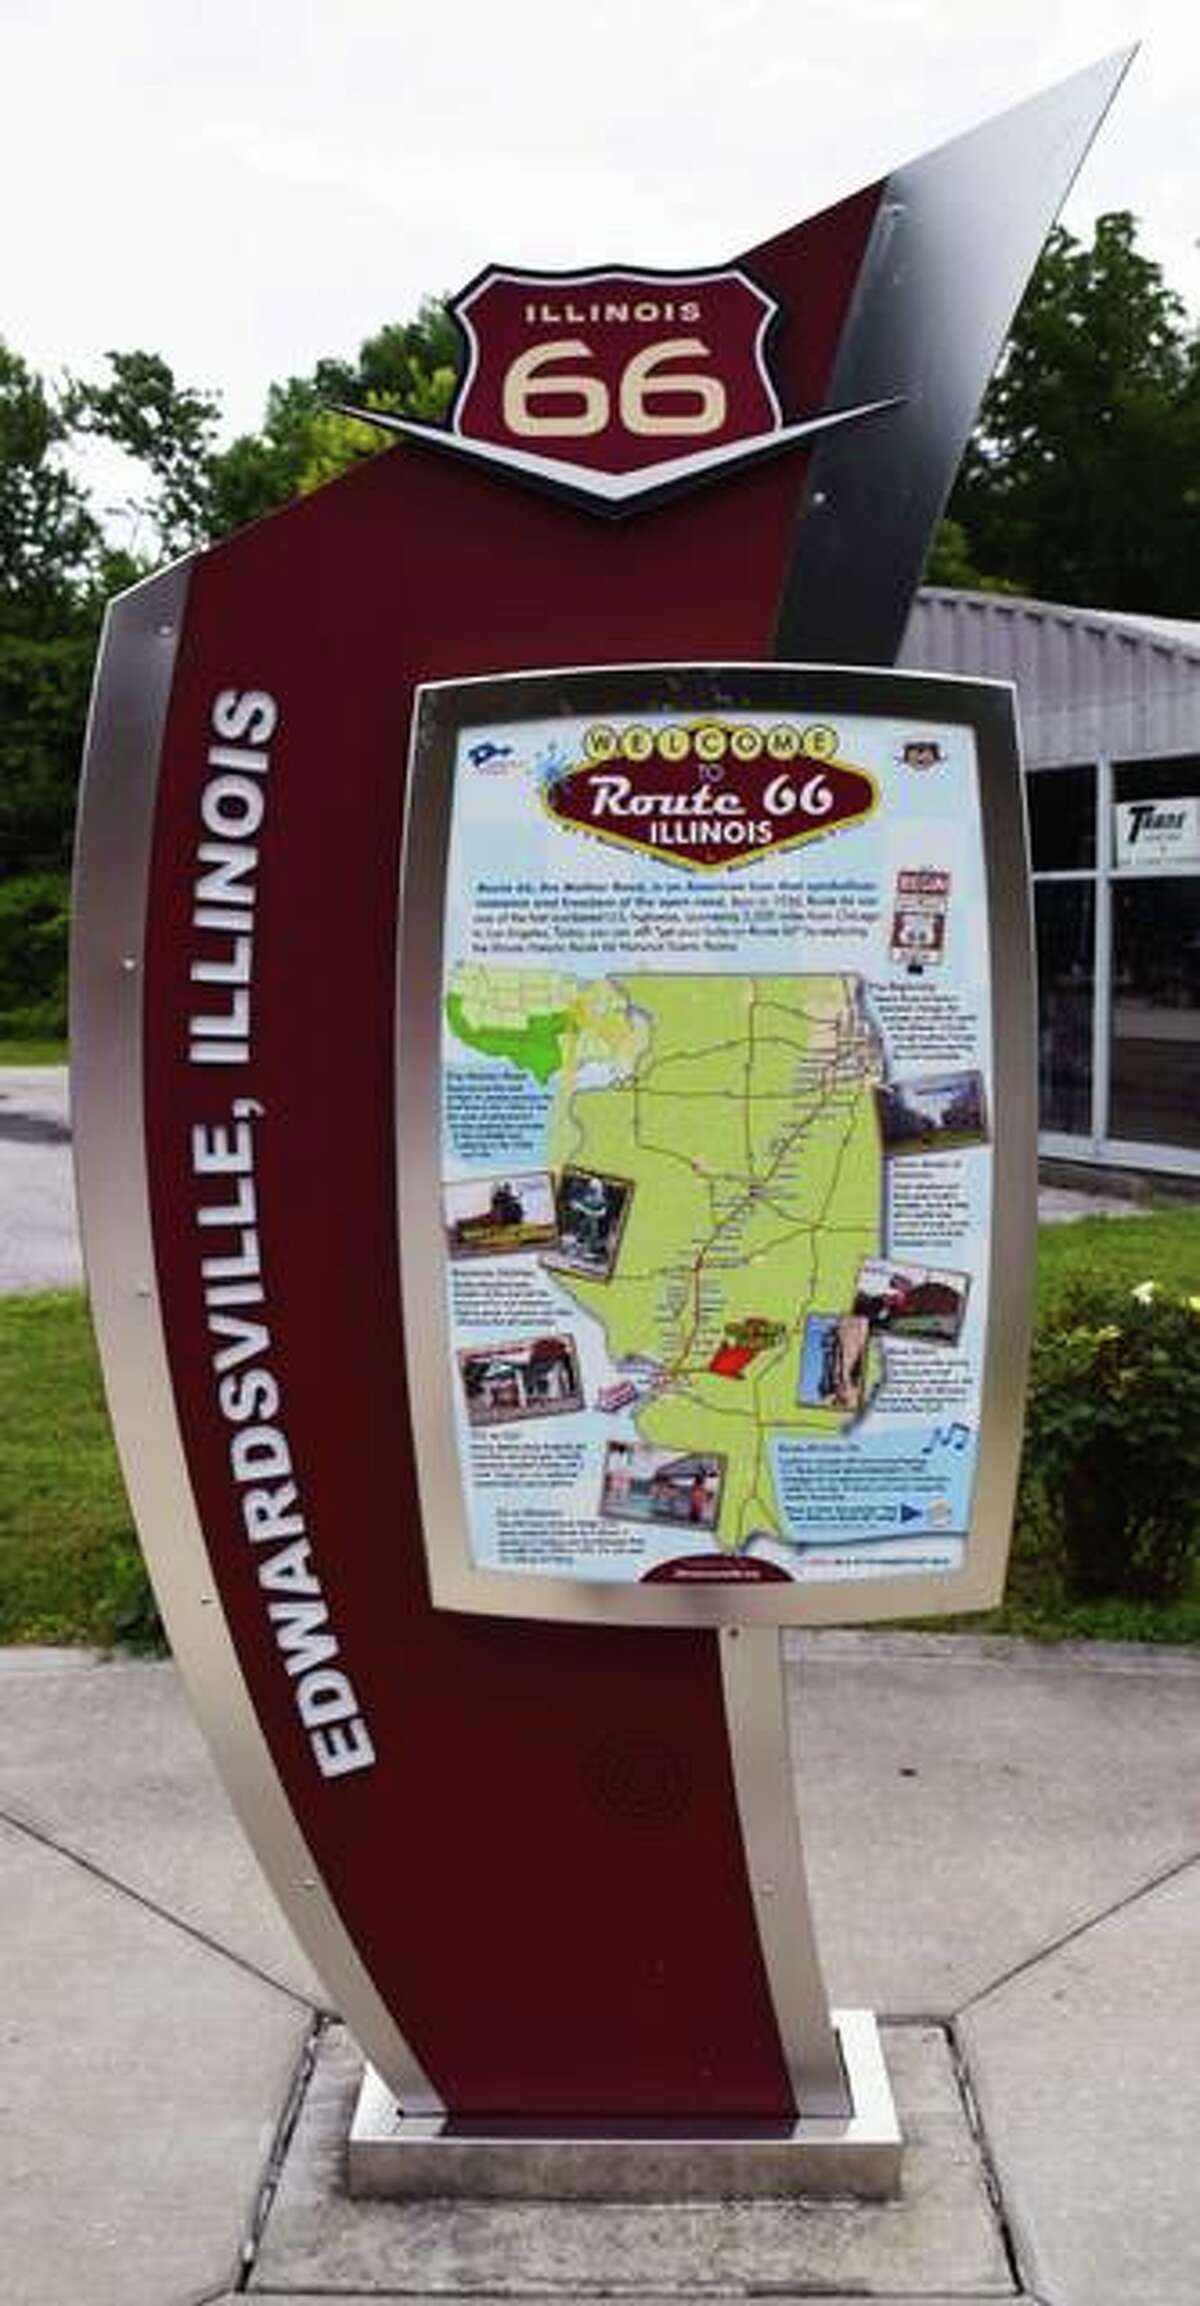 Route 66 road map and information sign at the intersection of W. Schwarz St. and Rt. 157 in Edwardsville